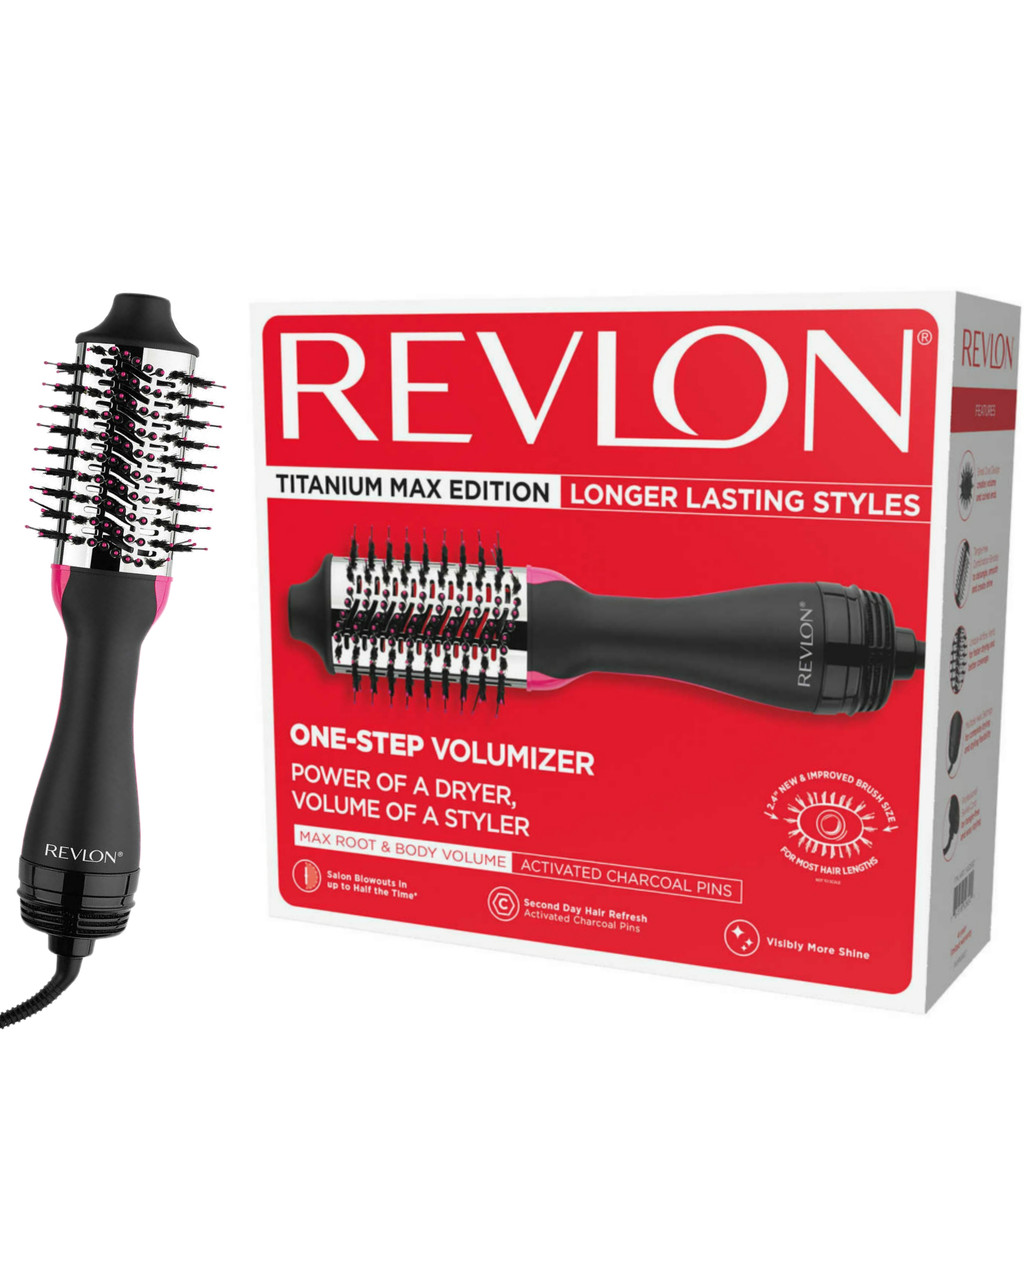 Why the Revlon One-Step Hair Dryer and Volumizer is 's